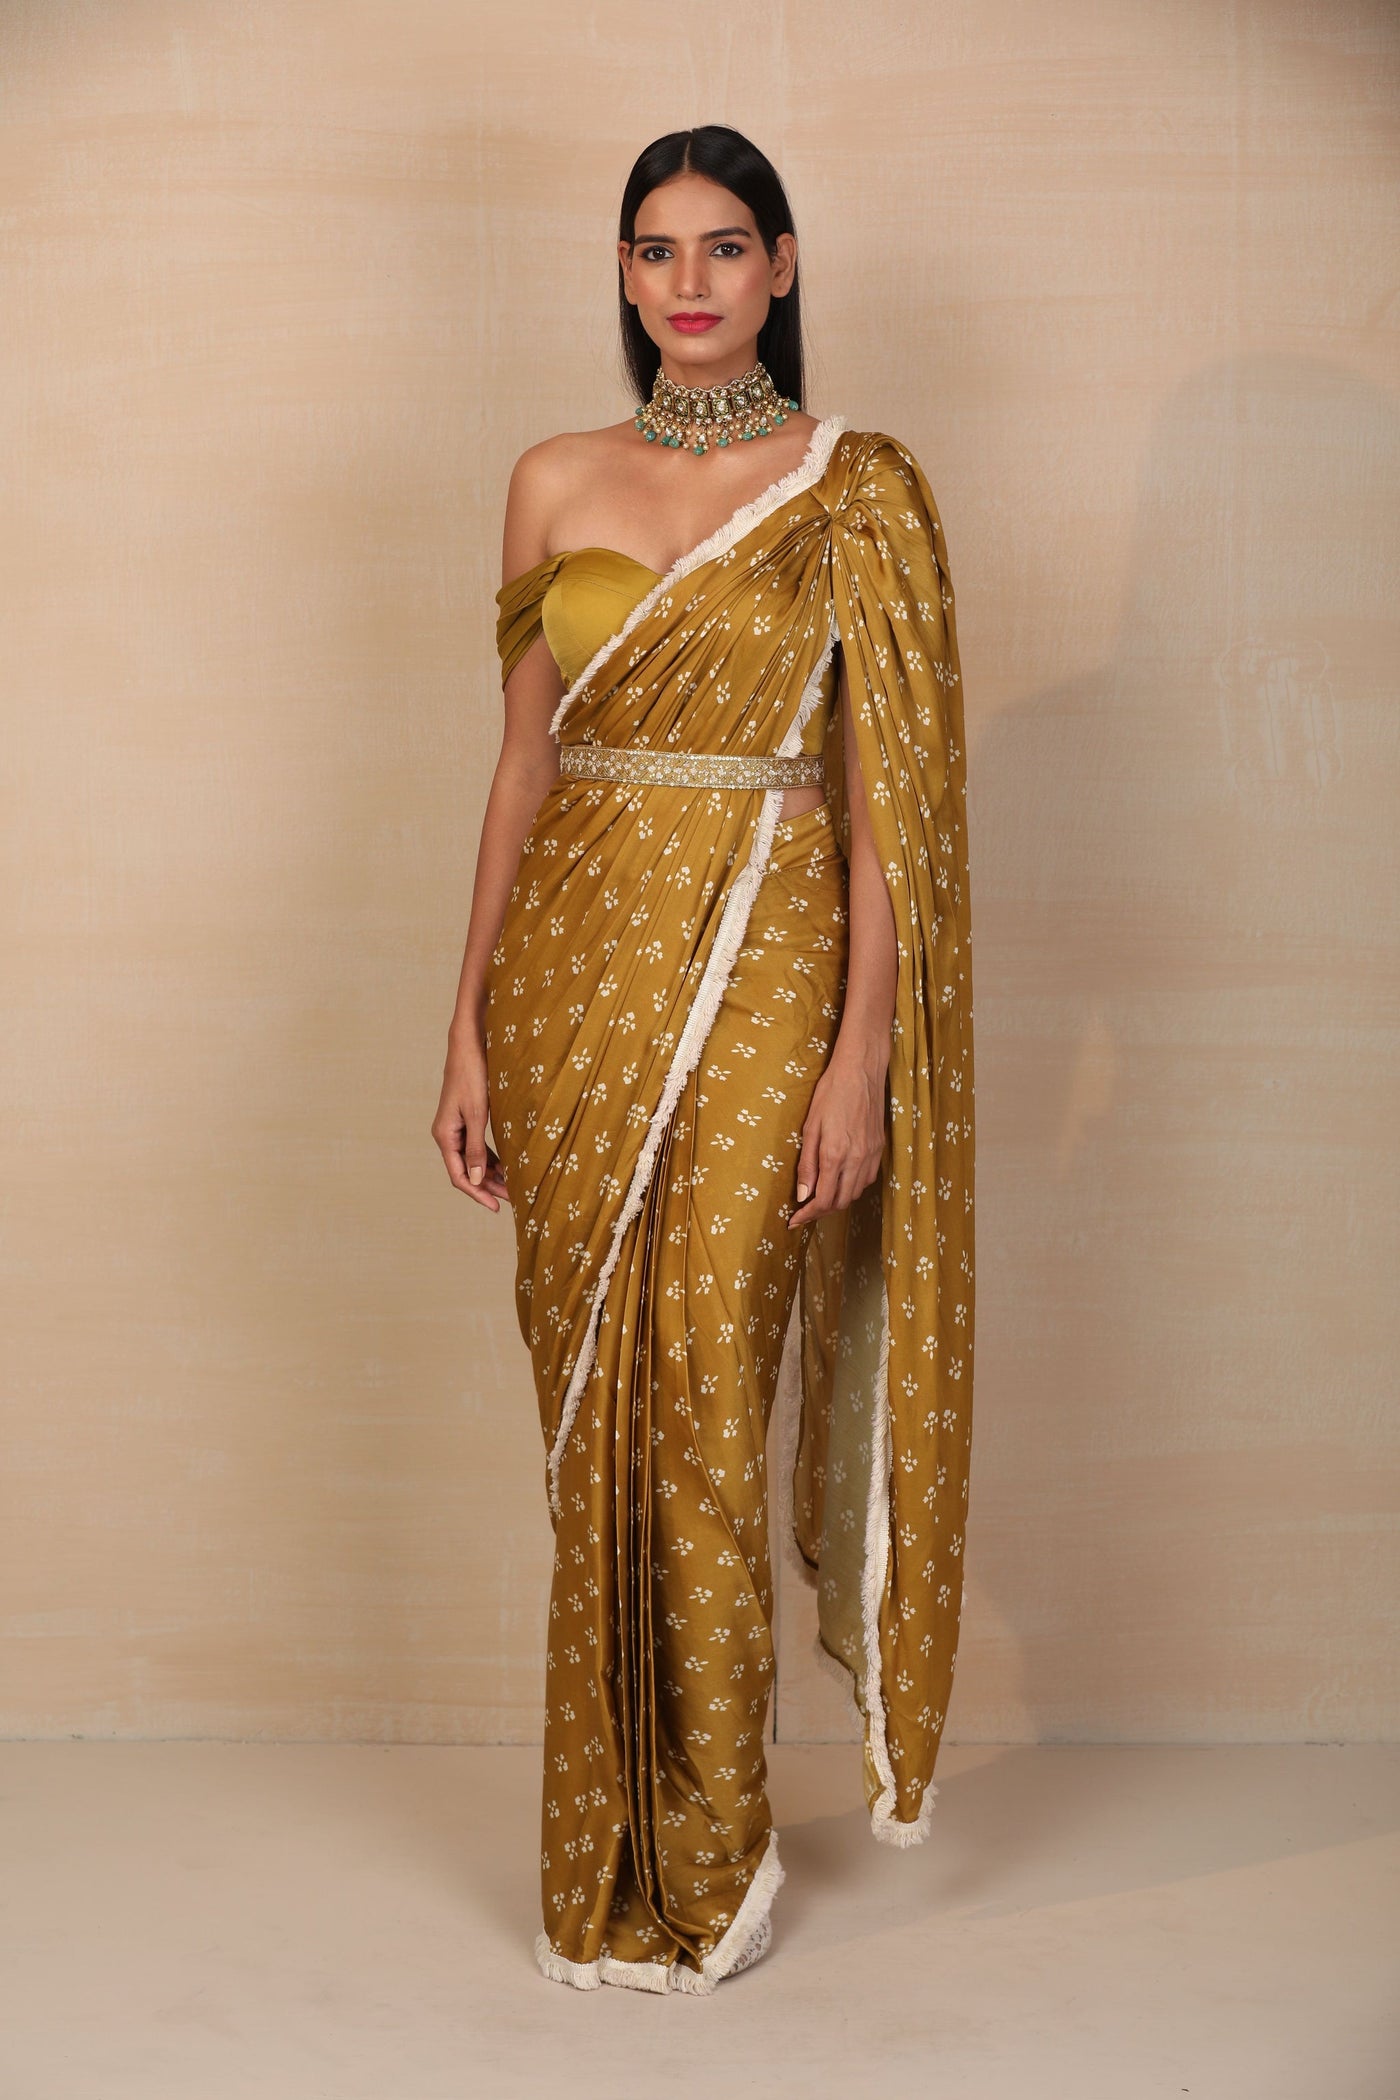 Mustard Pre-draped Saree Set - Indian Clothing in Denver, CO, Aurora, CO, Boulder, CO, Fort Collins, CO, Colorado Springs, CO, Parker, CO, Highlands Ranch, CO, Cherry Creek, CO, Centennial, CO, and Longmont, CO. Nationwide shipping USA - India Fashion X